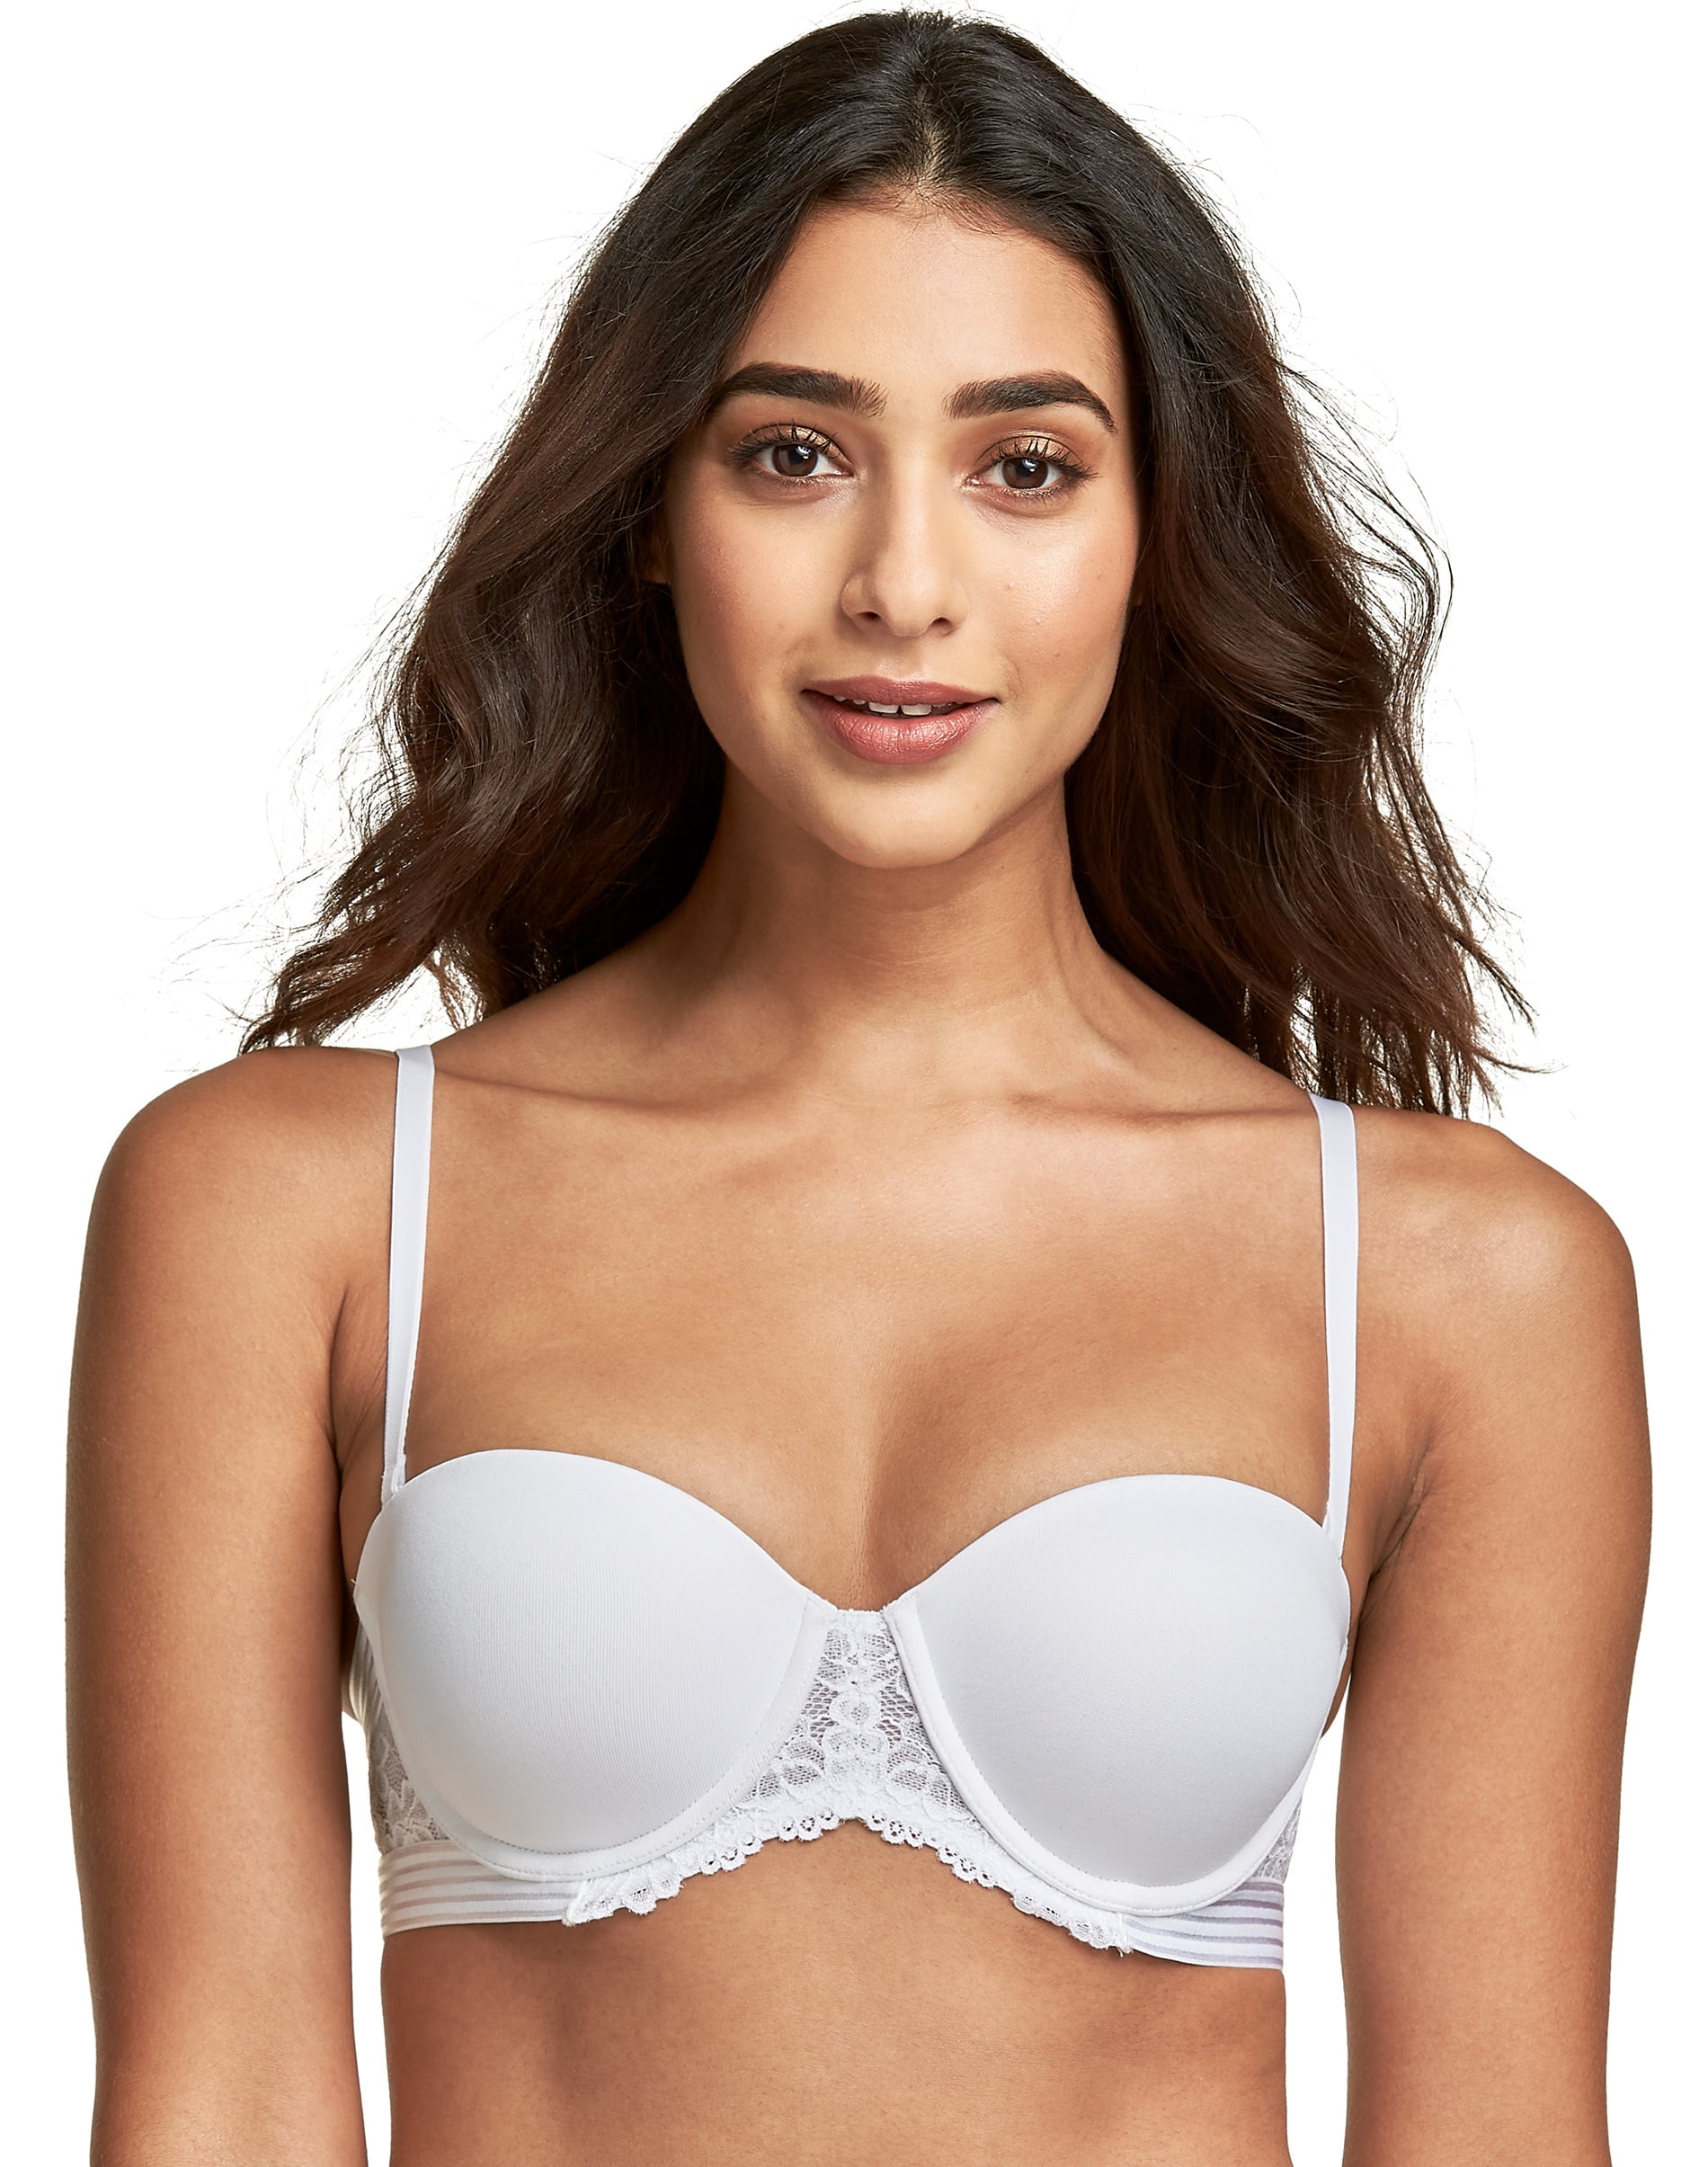 Women's Self Expressions SE1102 Essential Multiway Push Up Bra (White 36B)